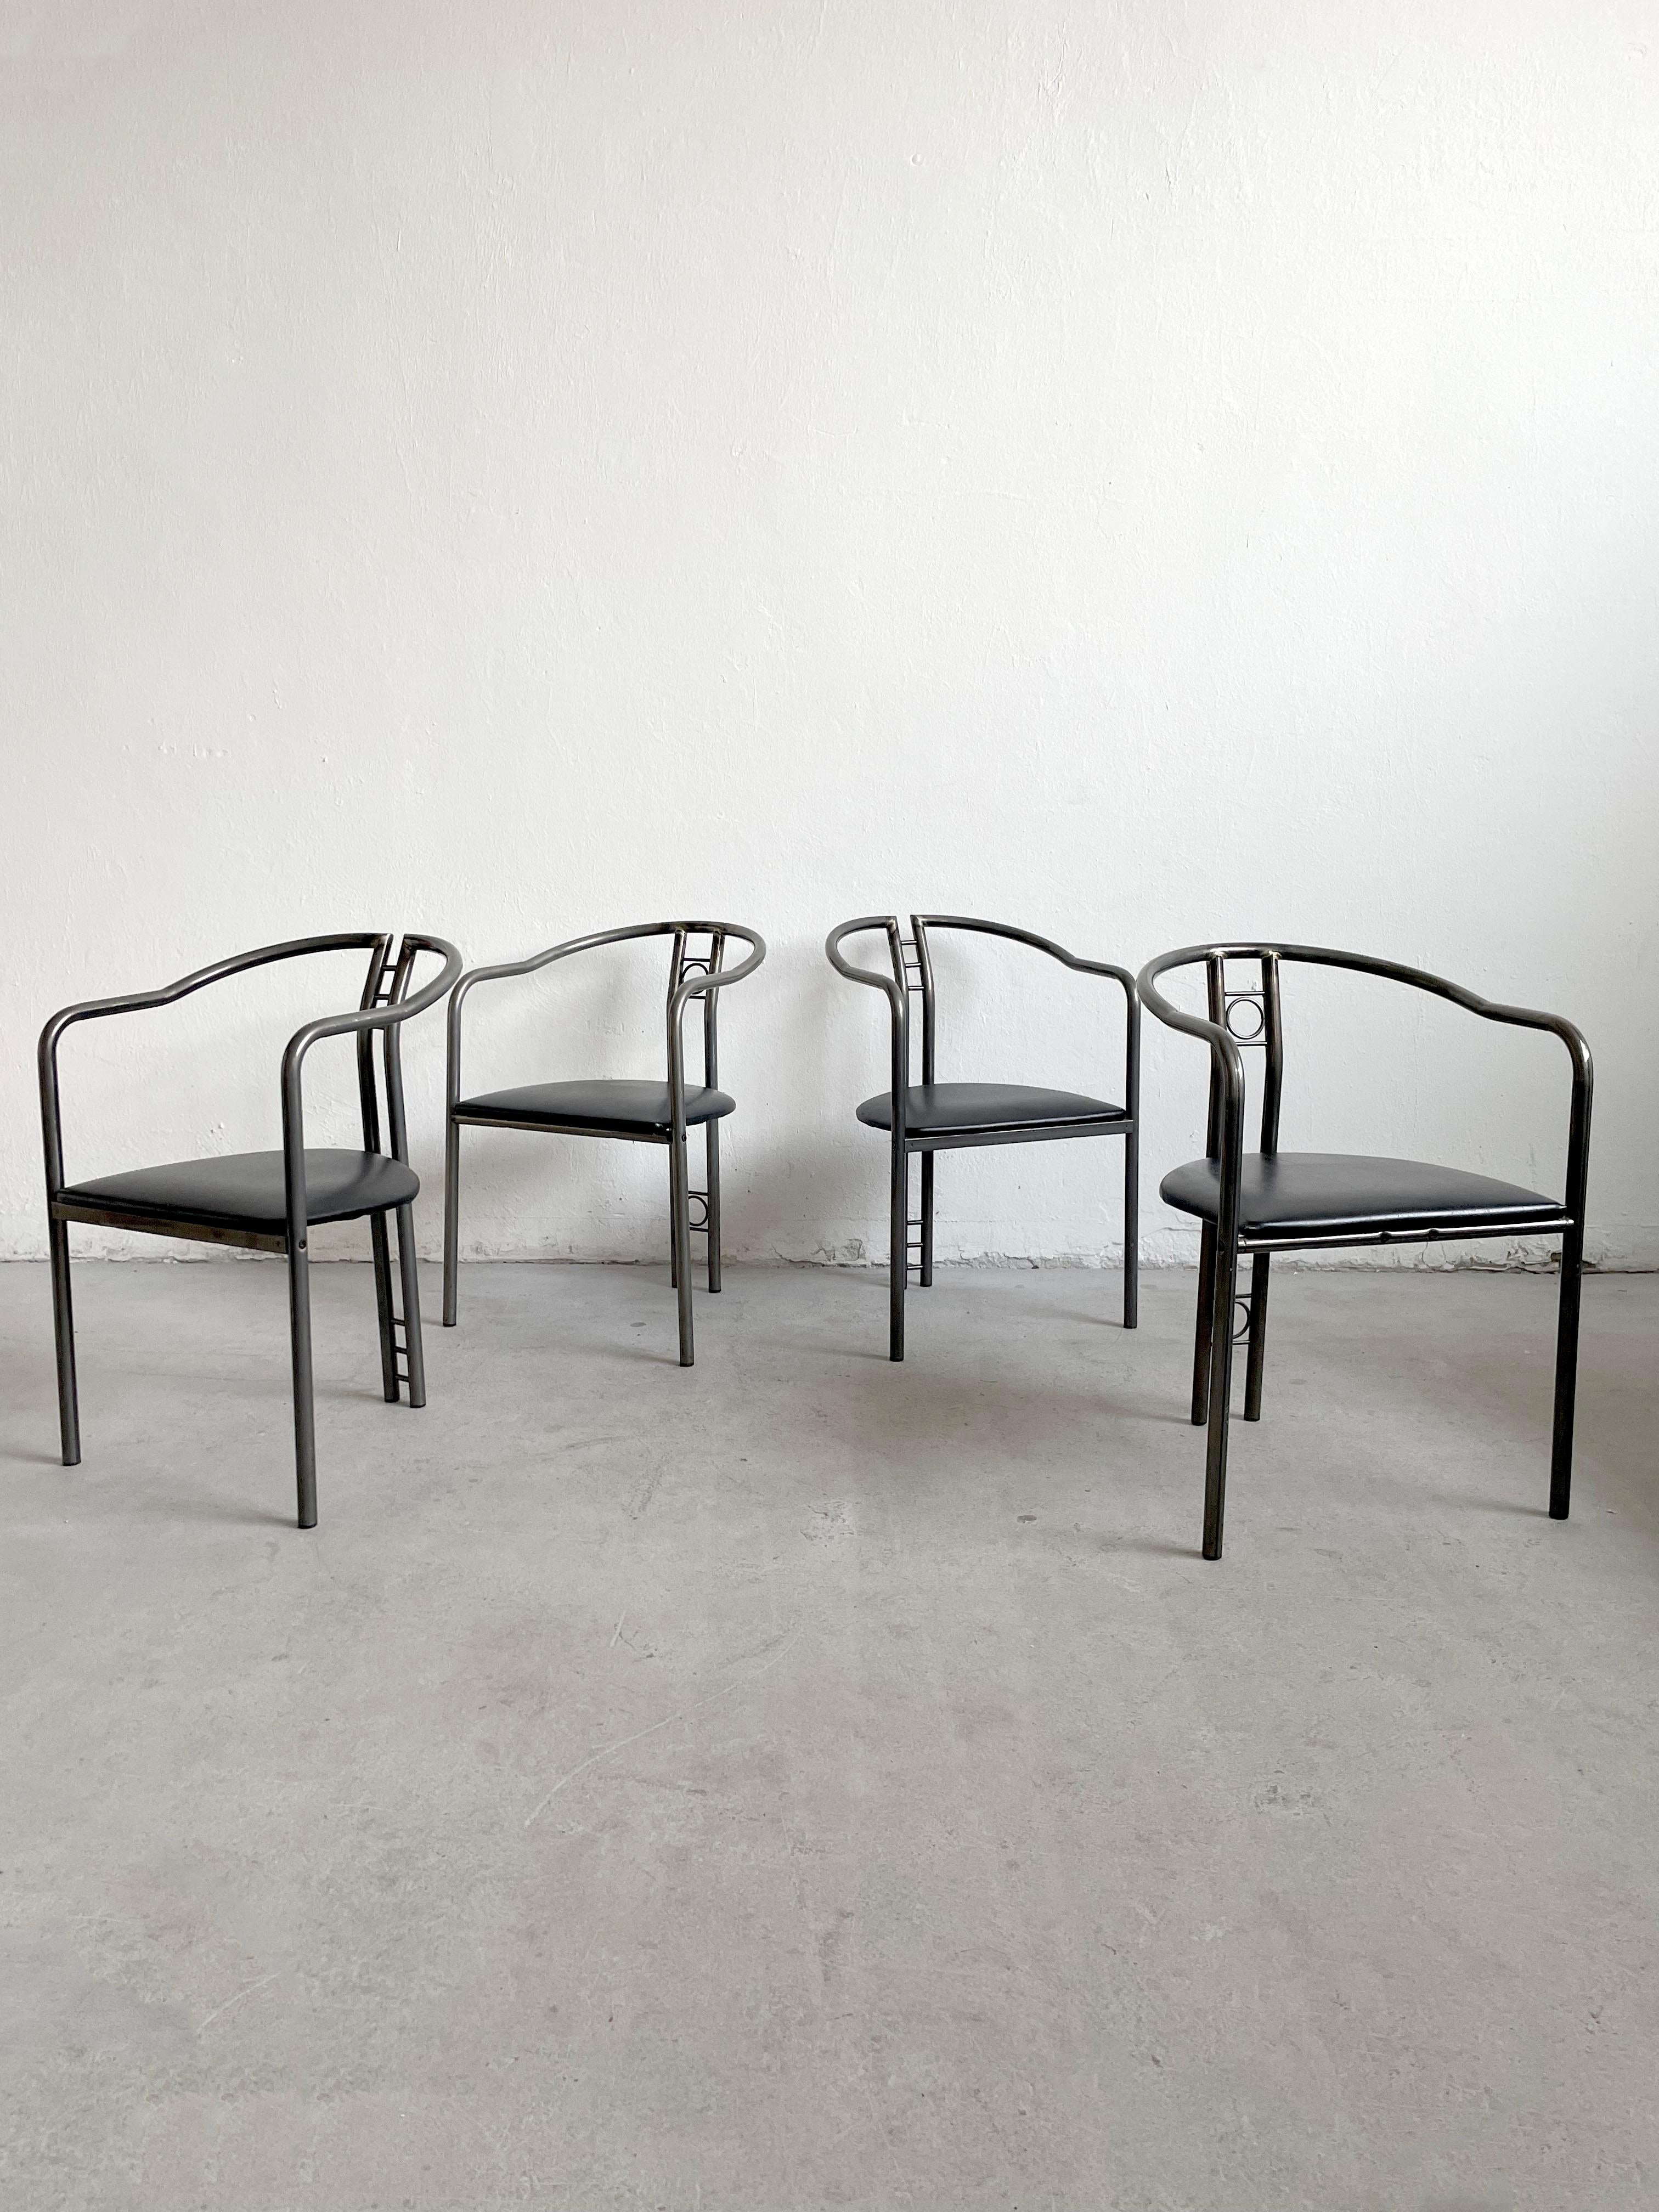 Post-Modern Set of 4 Postmodern Dining Chairs, Belgium 1980's For Sale